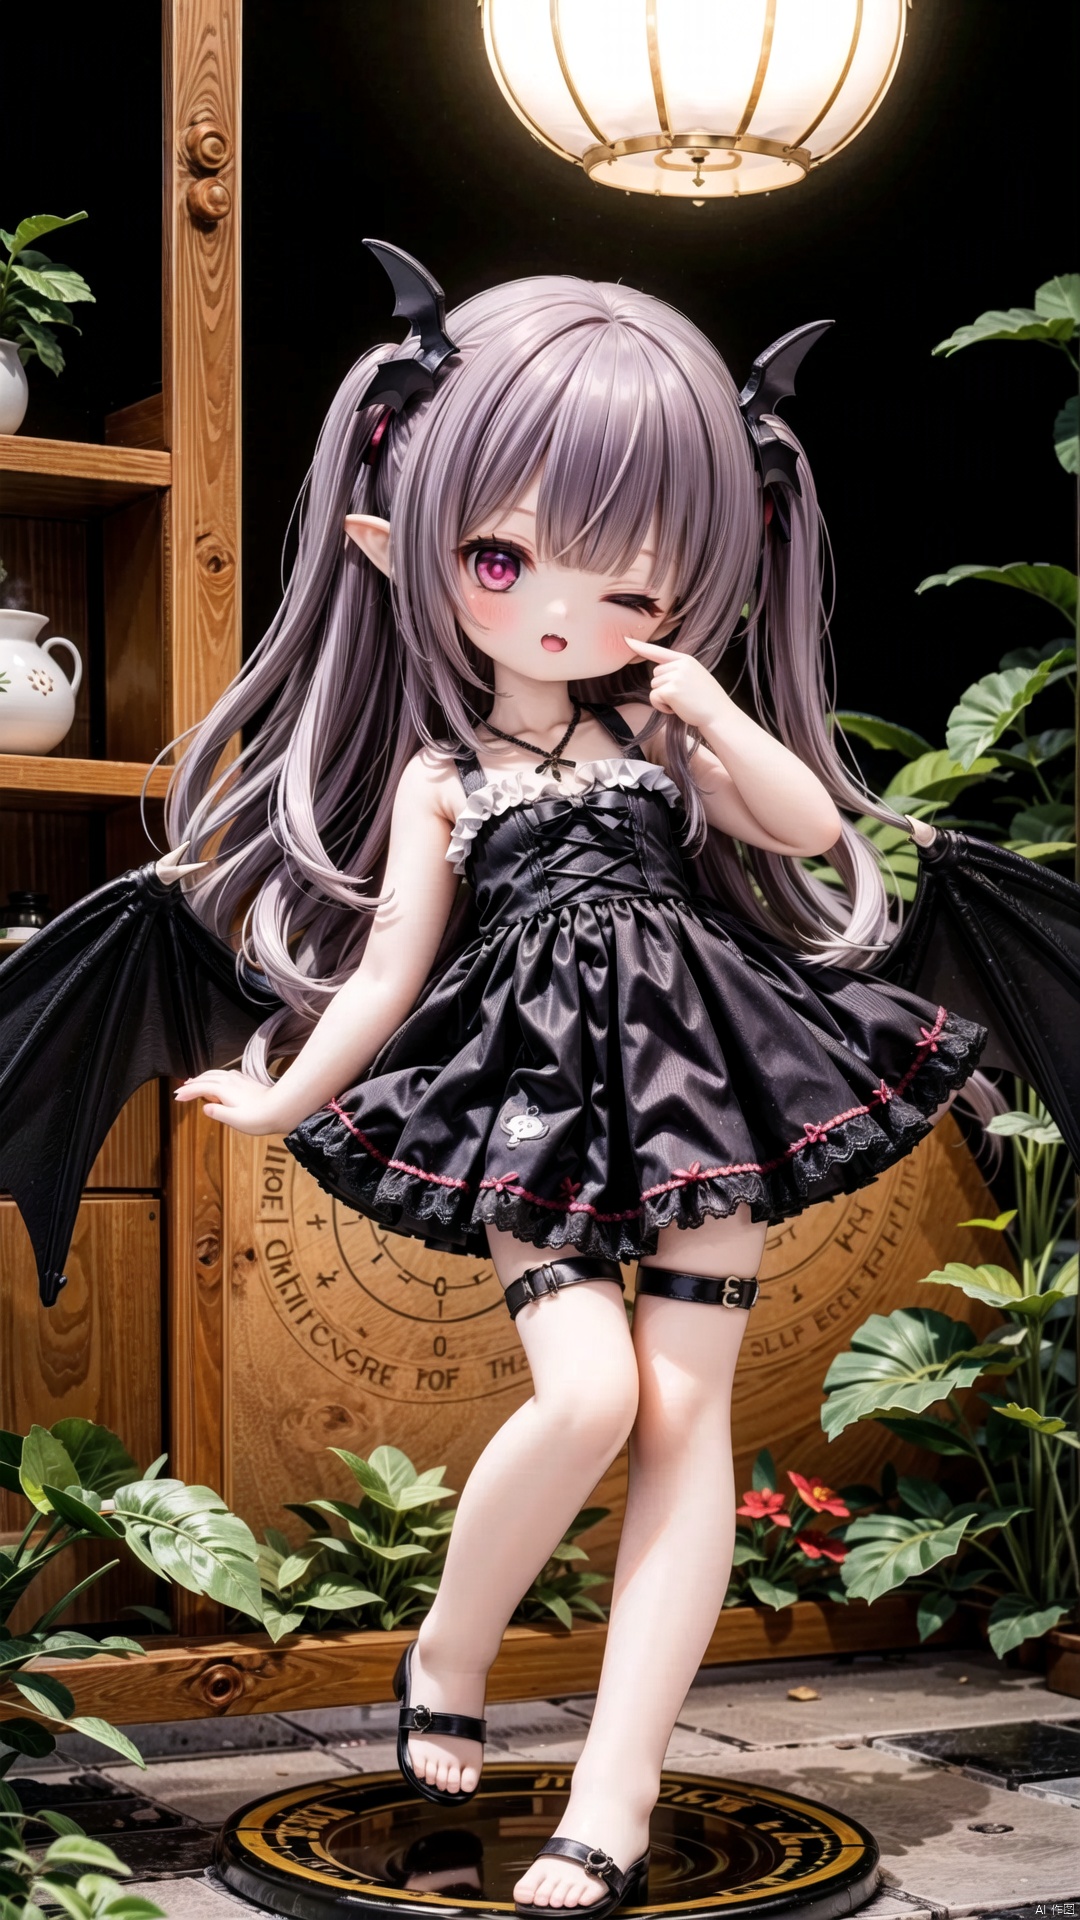 koakuma,female child,Little girl（1.5）,aged down,beautiful detailed girl,narrow waist,small breasts,Glowing skin,steaming body,demon horns,bat wings,transparent wings,Delicate cute face,Black and red Gothic skirt,fine fabric emphasis,ornate clothes,red Eyes,beautiful detailed eyes,Glowing eyes,(one eye closed),((Deep purple hair)),long hair,wavy hair,glowing hair,Extremely delicate longhair,bat hair ornament,Red Heart Necklace,bare legs,Thin leg,bare arms,Slender fingers,steepled fingers,Shiny nails,mischievous smile(expression),finger to eye,open mouth,tongue out,fangs out,beautiful detailed lips,bat(ornament),garden, fountain,hyper realistic,magic,8k,incredible quality,best quality,masterpiece,highly detailed,extremely detailed CG,cinematic lighting